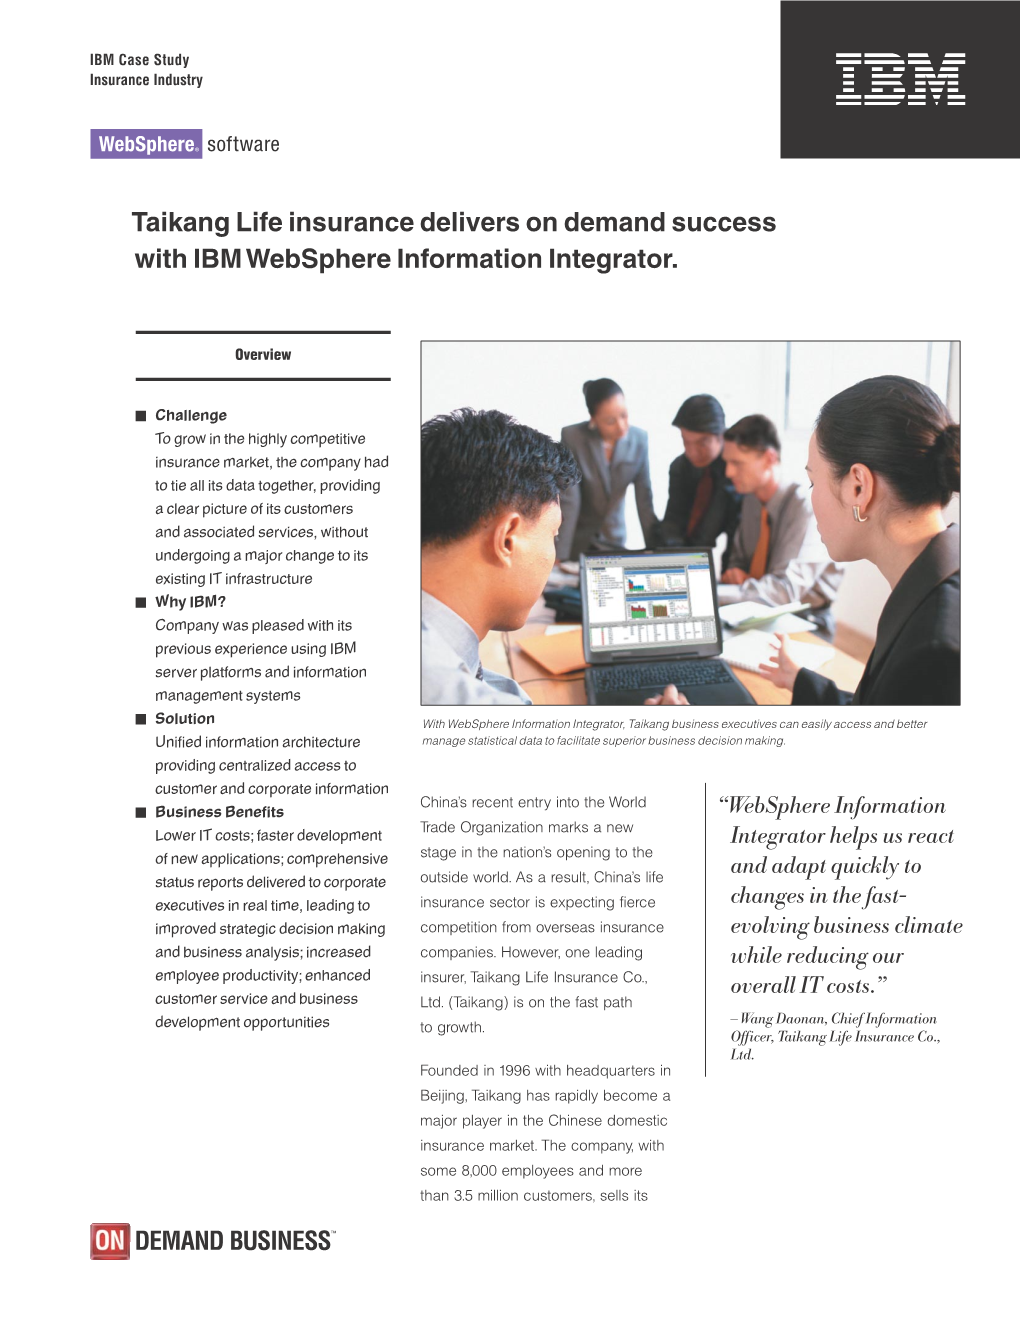 Taikang Life Insurance Delivers on Demand Success with IBM Websphere Information Integrator